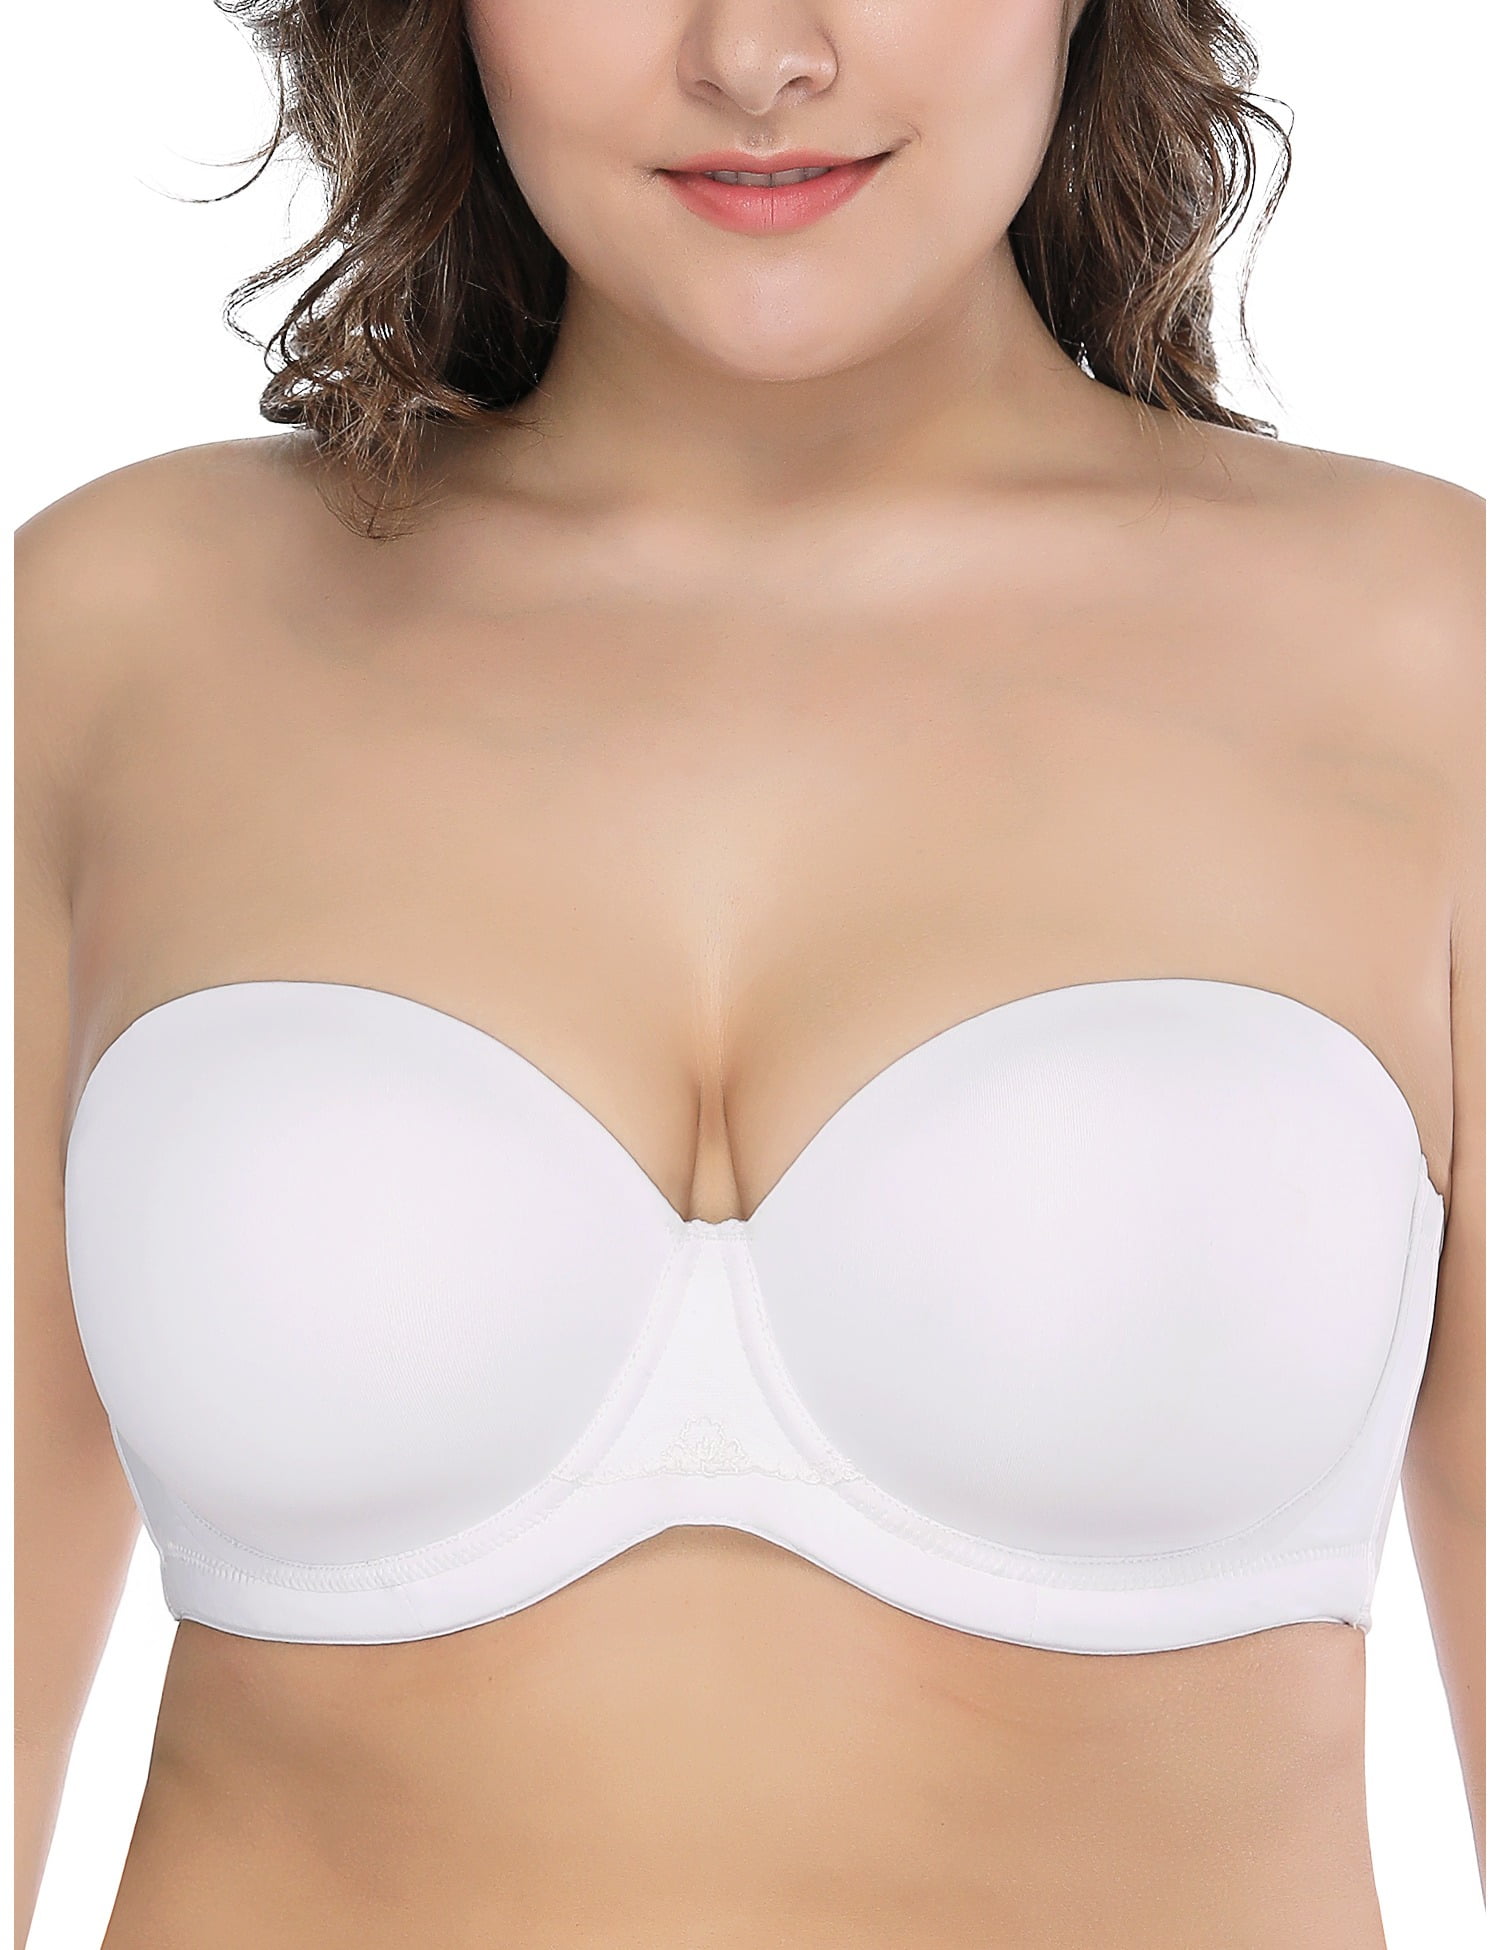 36A White Bralette, Bra With Hook and Loop Back Closure